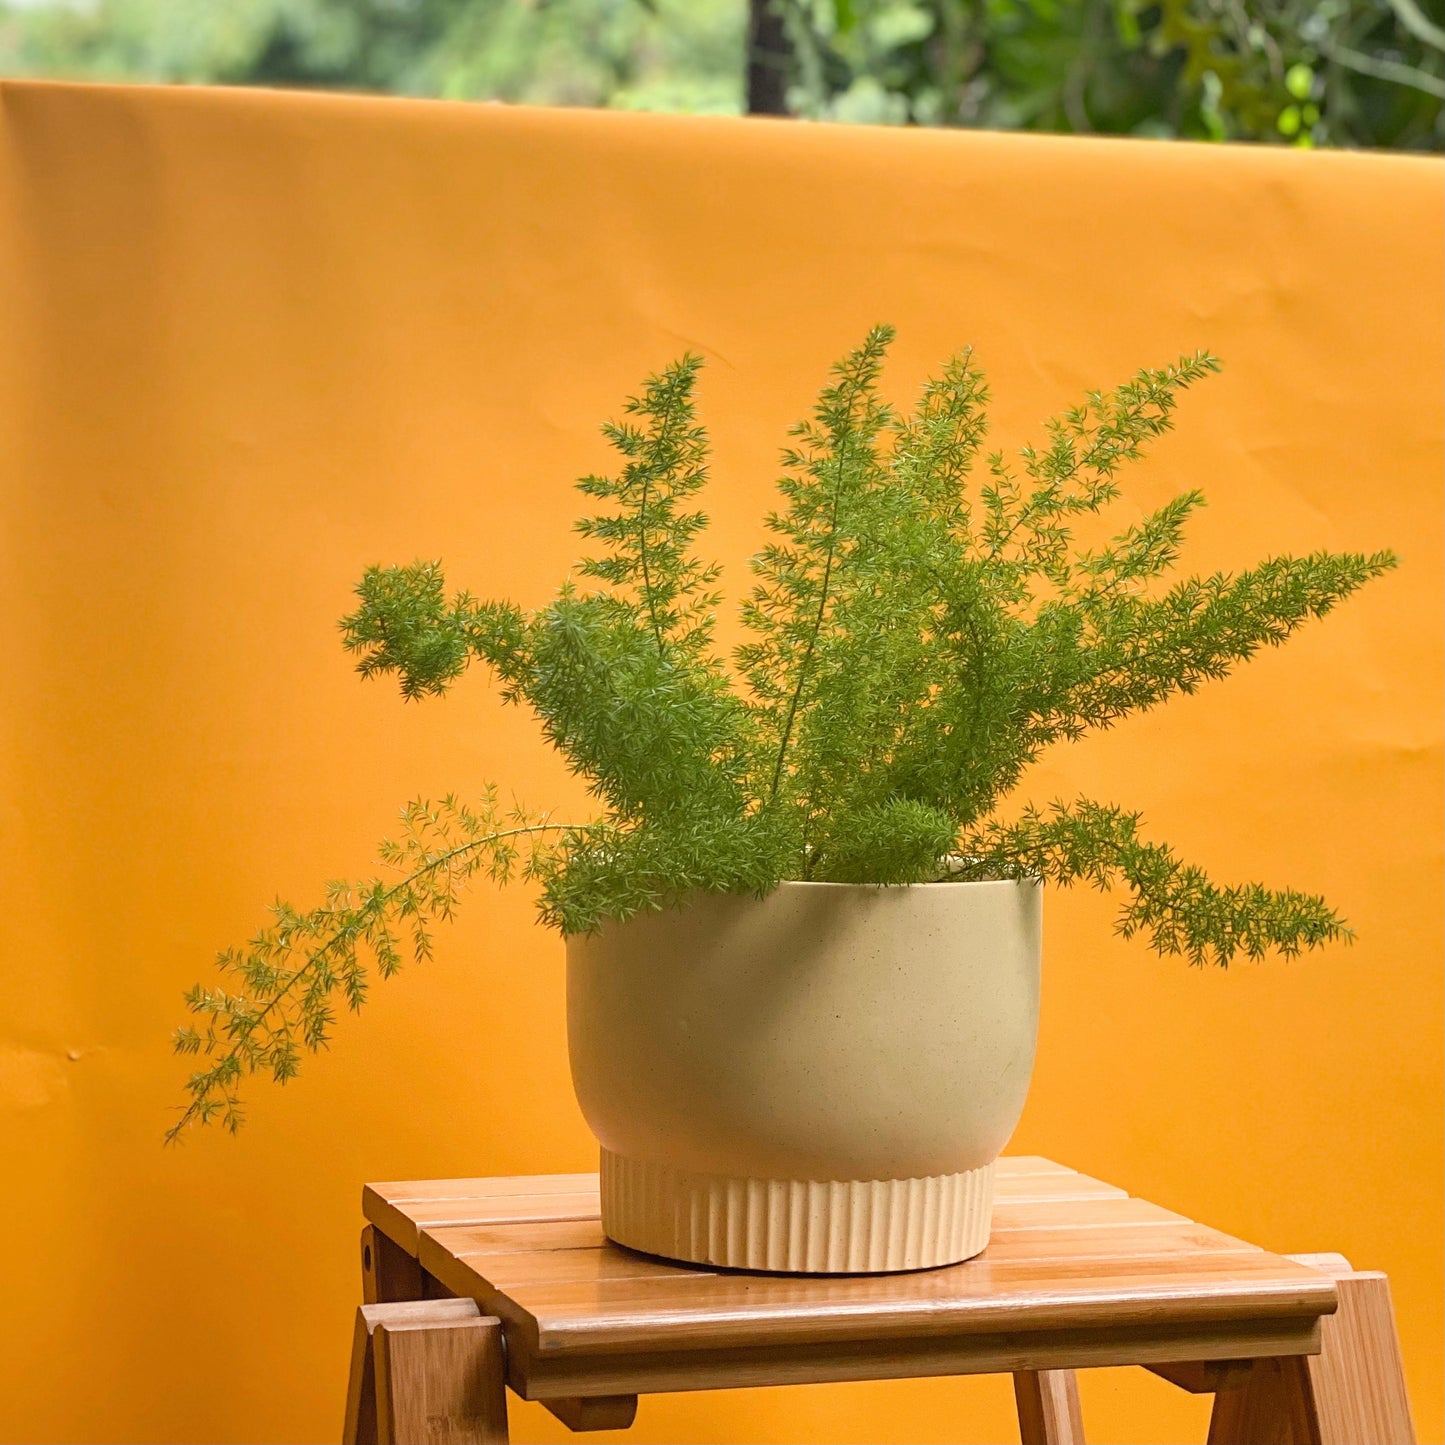 Foxtail Fern styled with Luna Planter